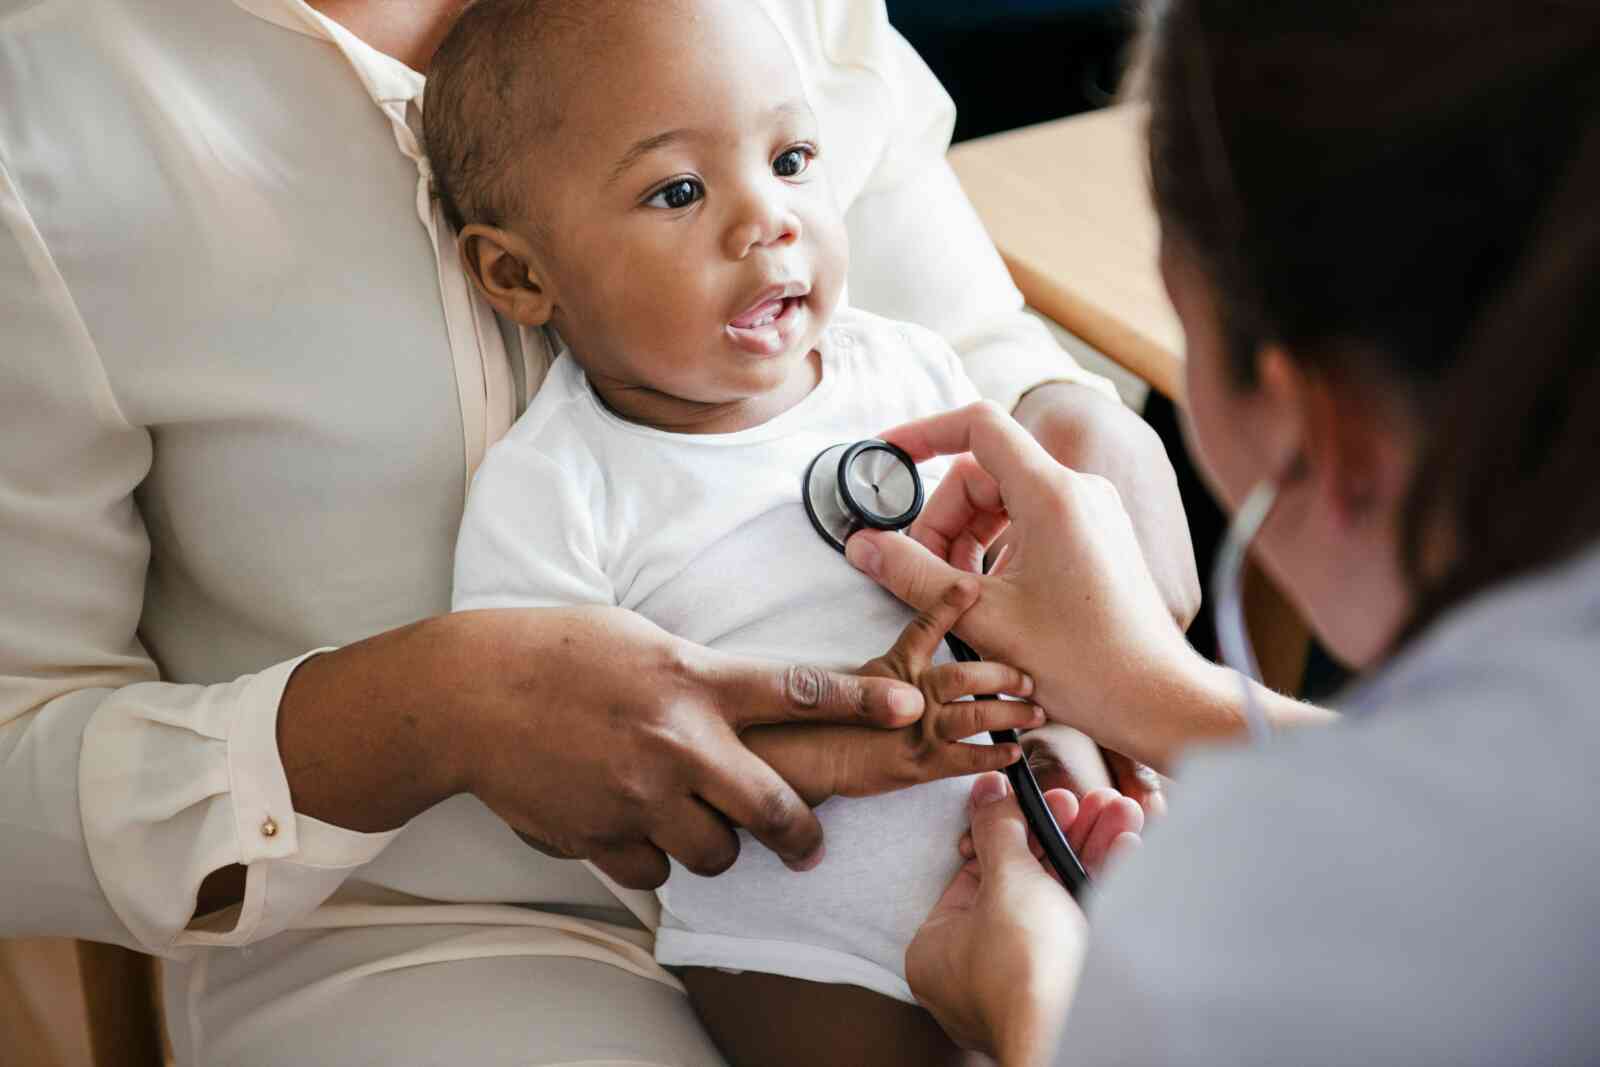 A baby is sitting on the lap of an adult individual whose face cannot be seen but their hand is placed on the baby's arm. The baby is facing an adult individual who appears to be a doctor and has a stethoscope placed on the baby's chest. The baby is smiling. The baby and adult they are sitting on have dark brown skin and the other individual has light skin.